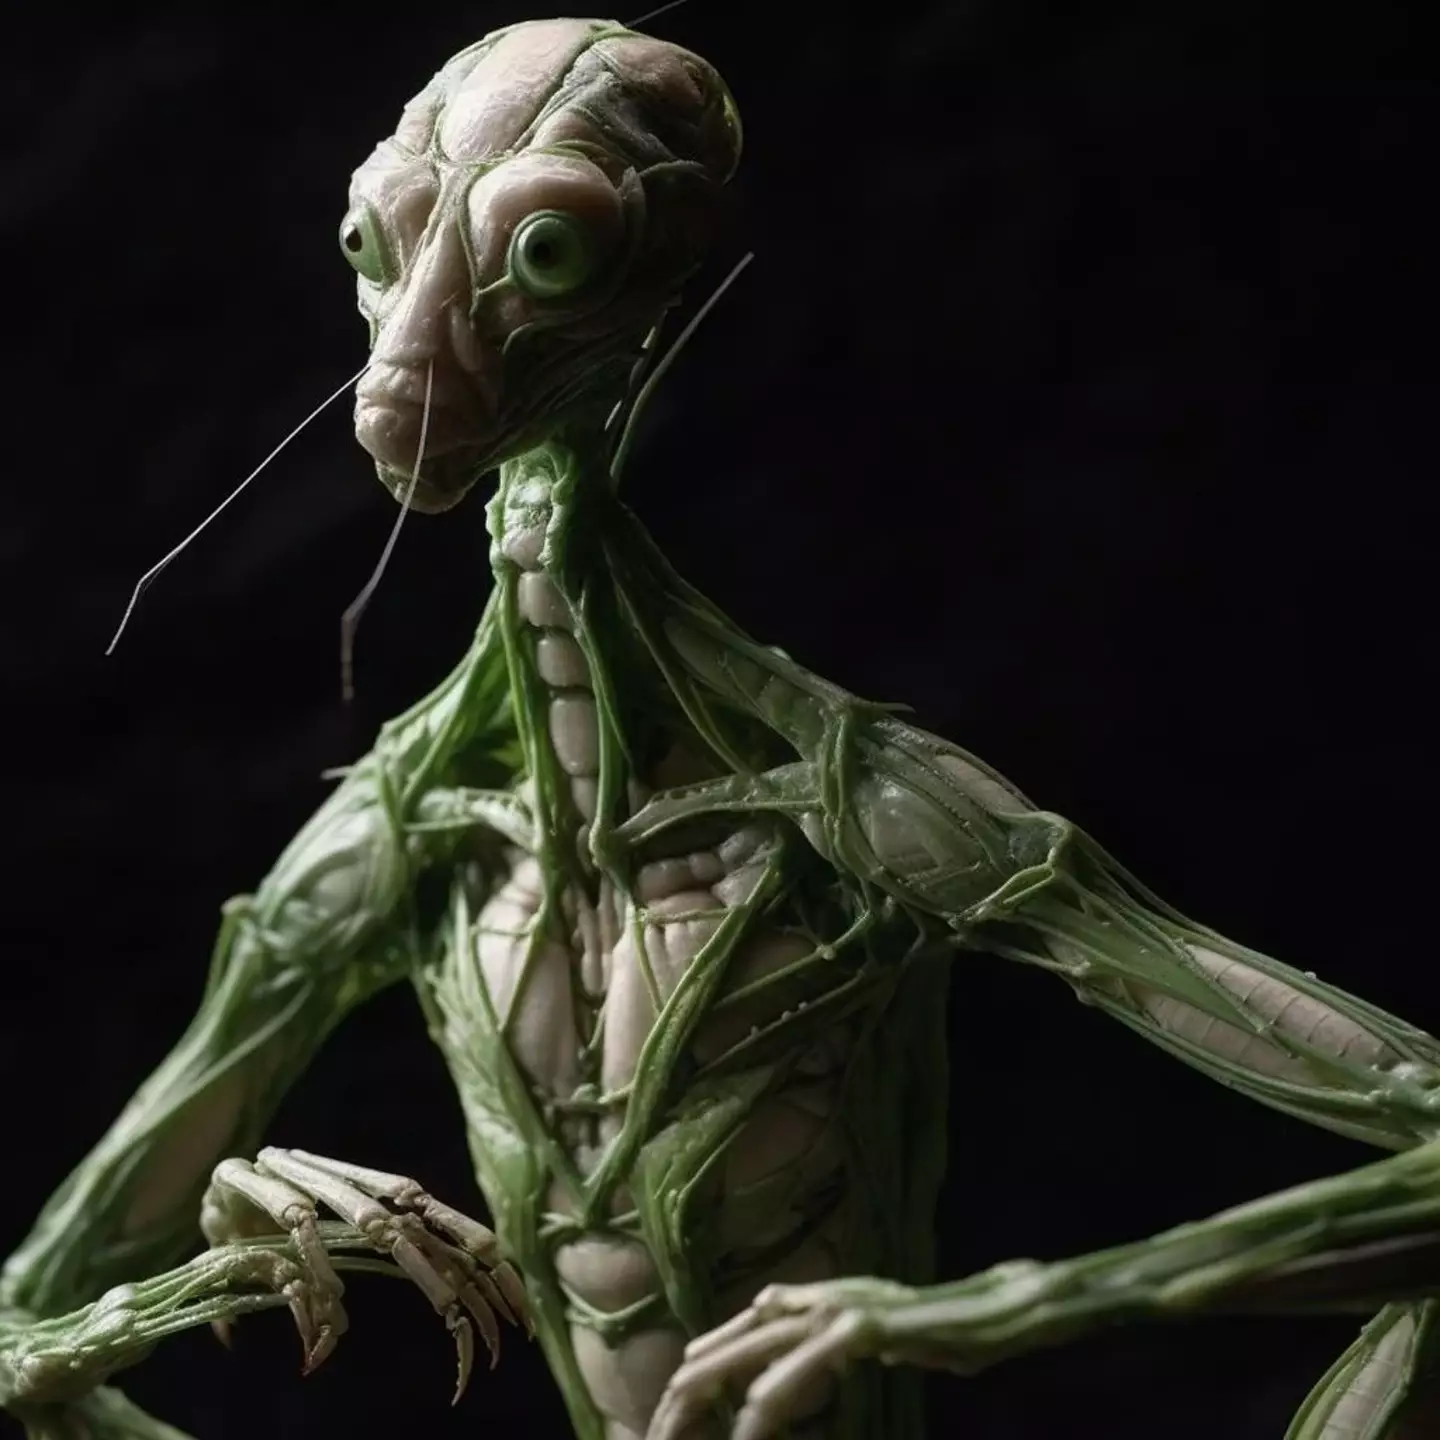 A render of a human mantis that looks pretty cool.